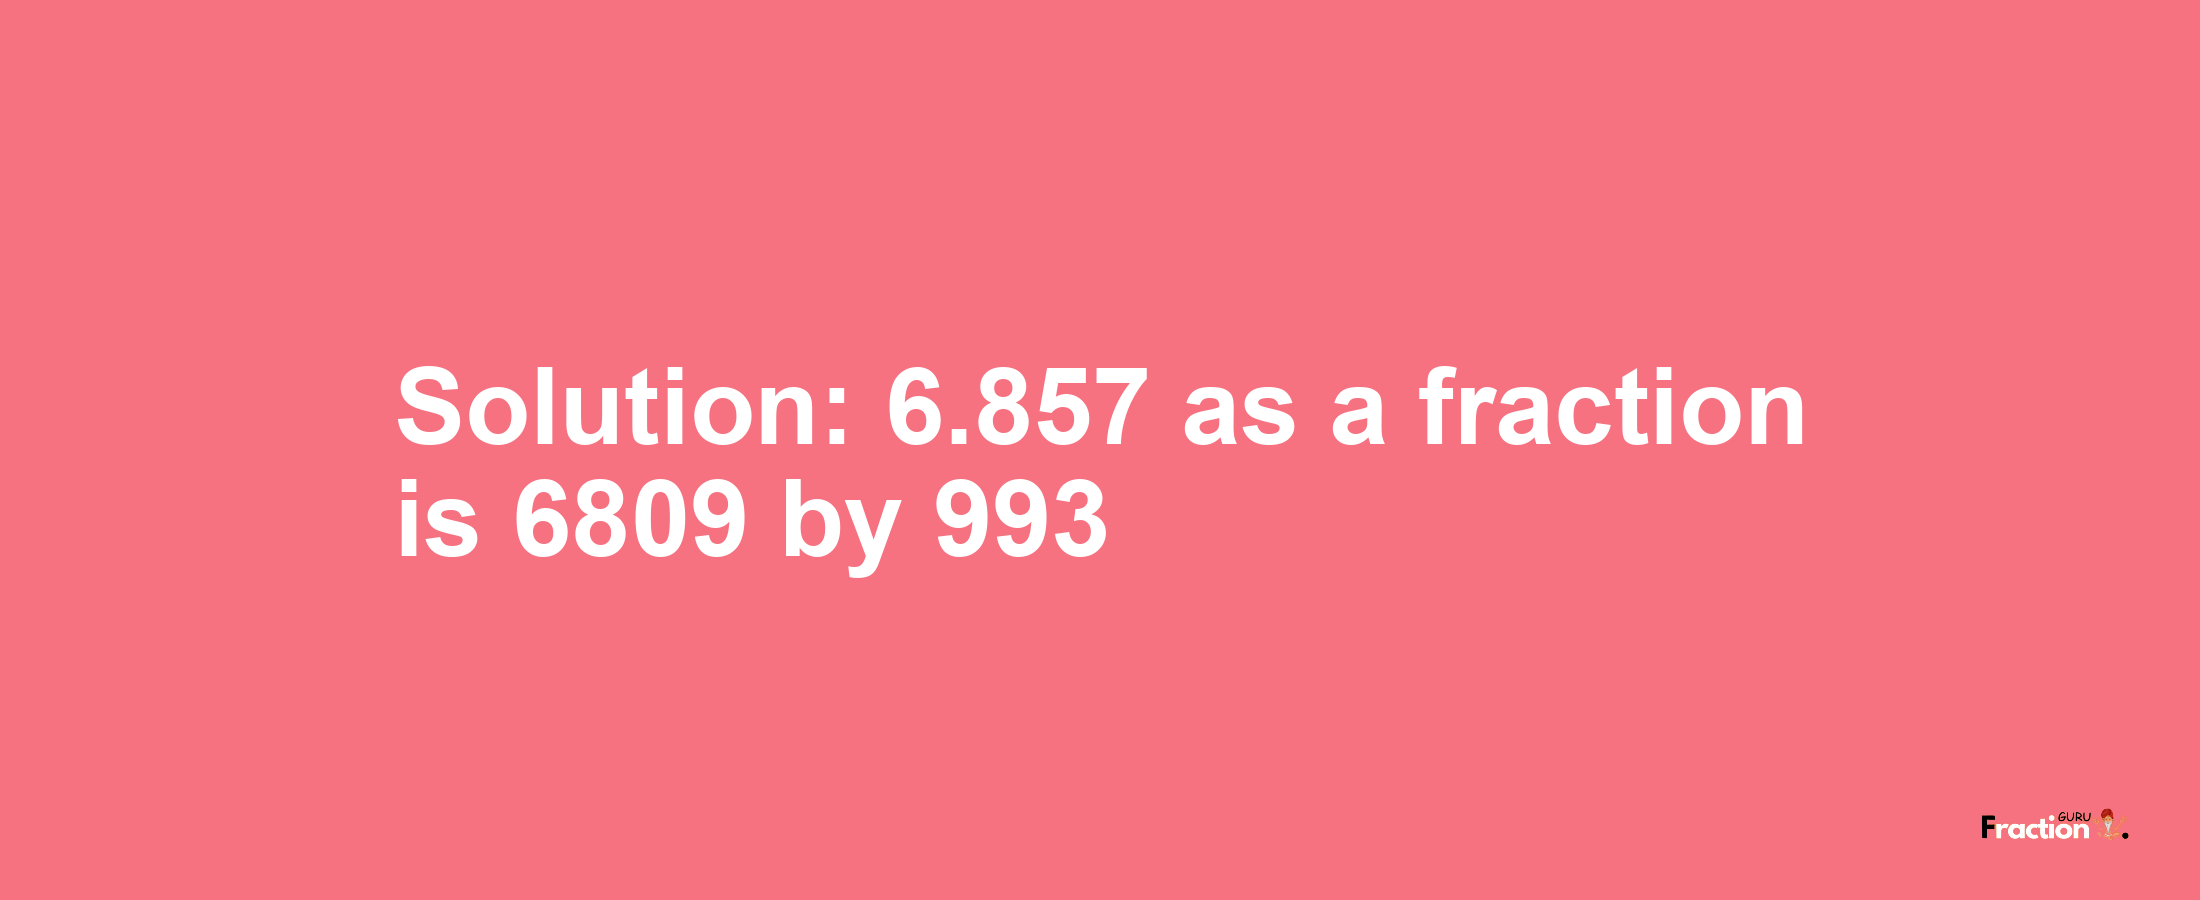 Solution:6.857 as a fraction is 6809/993